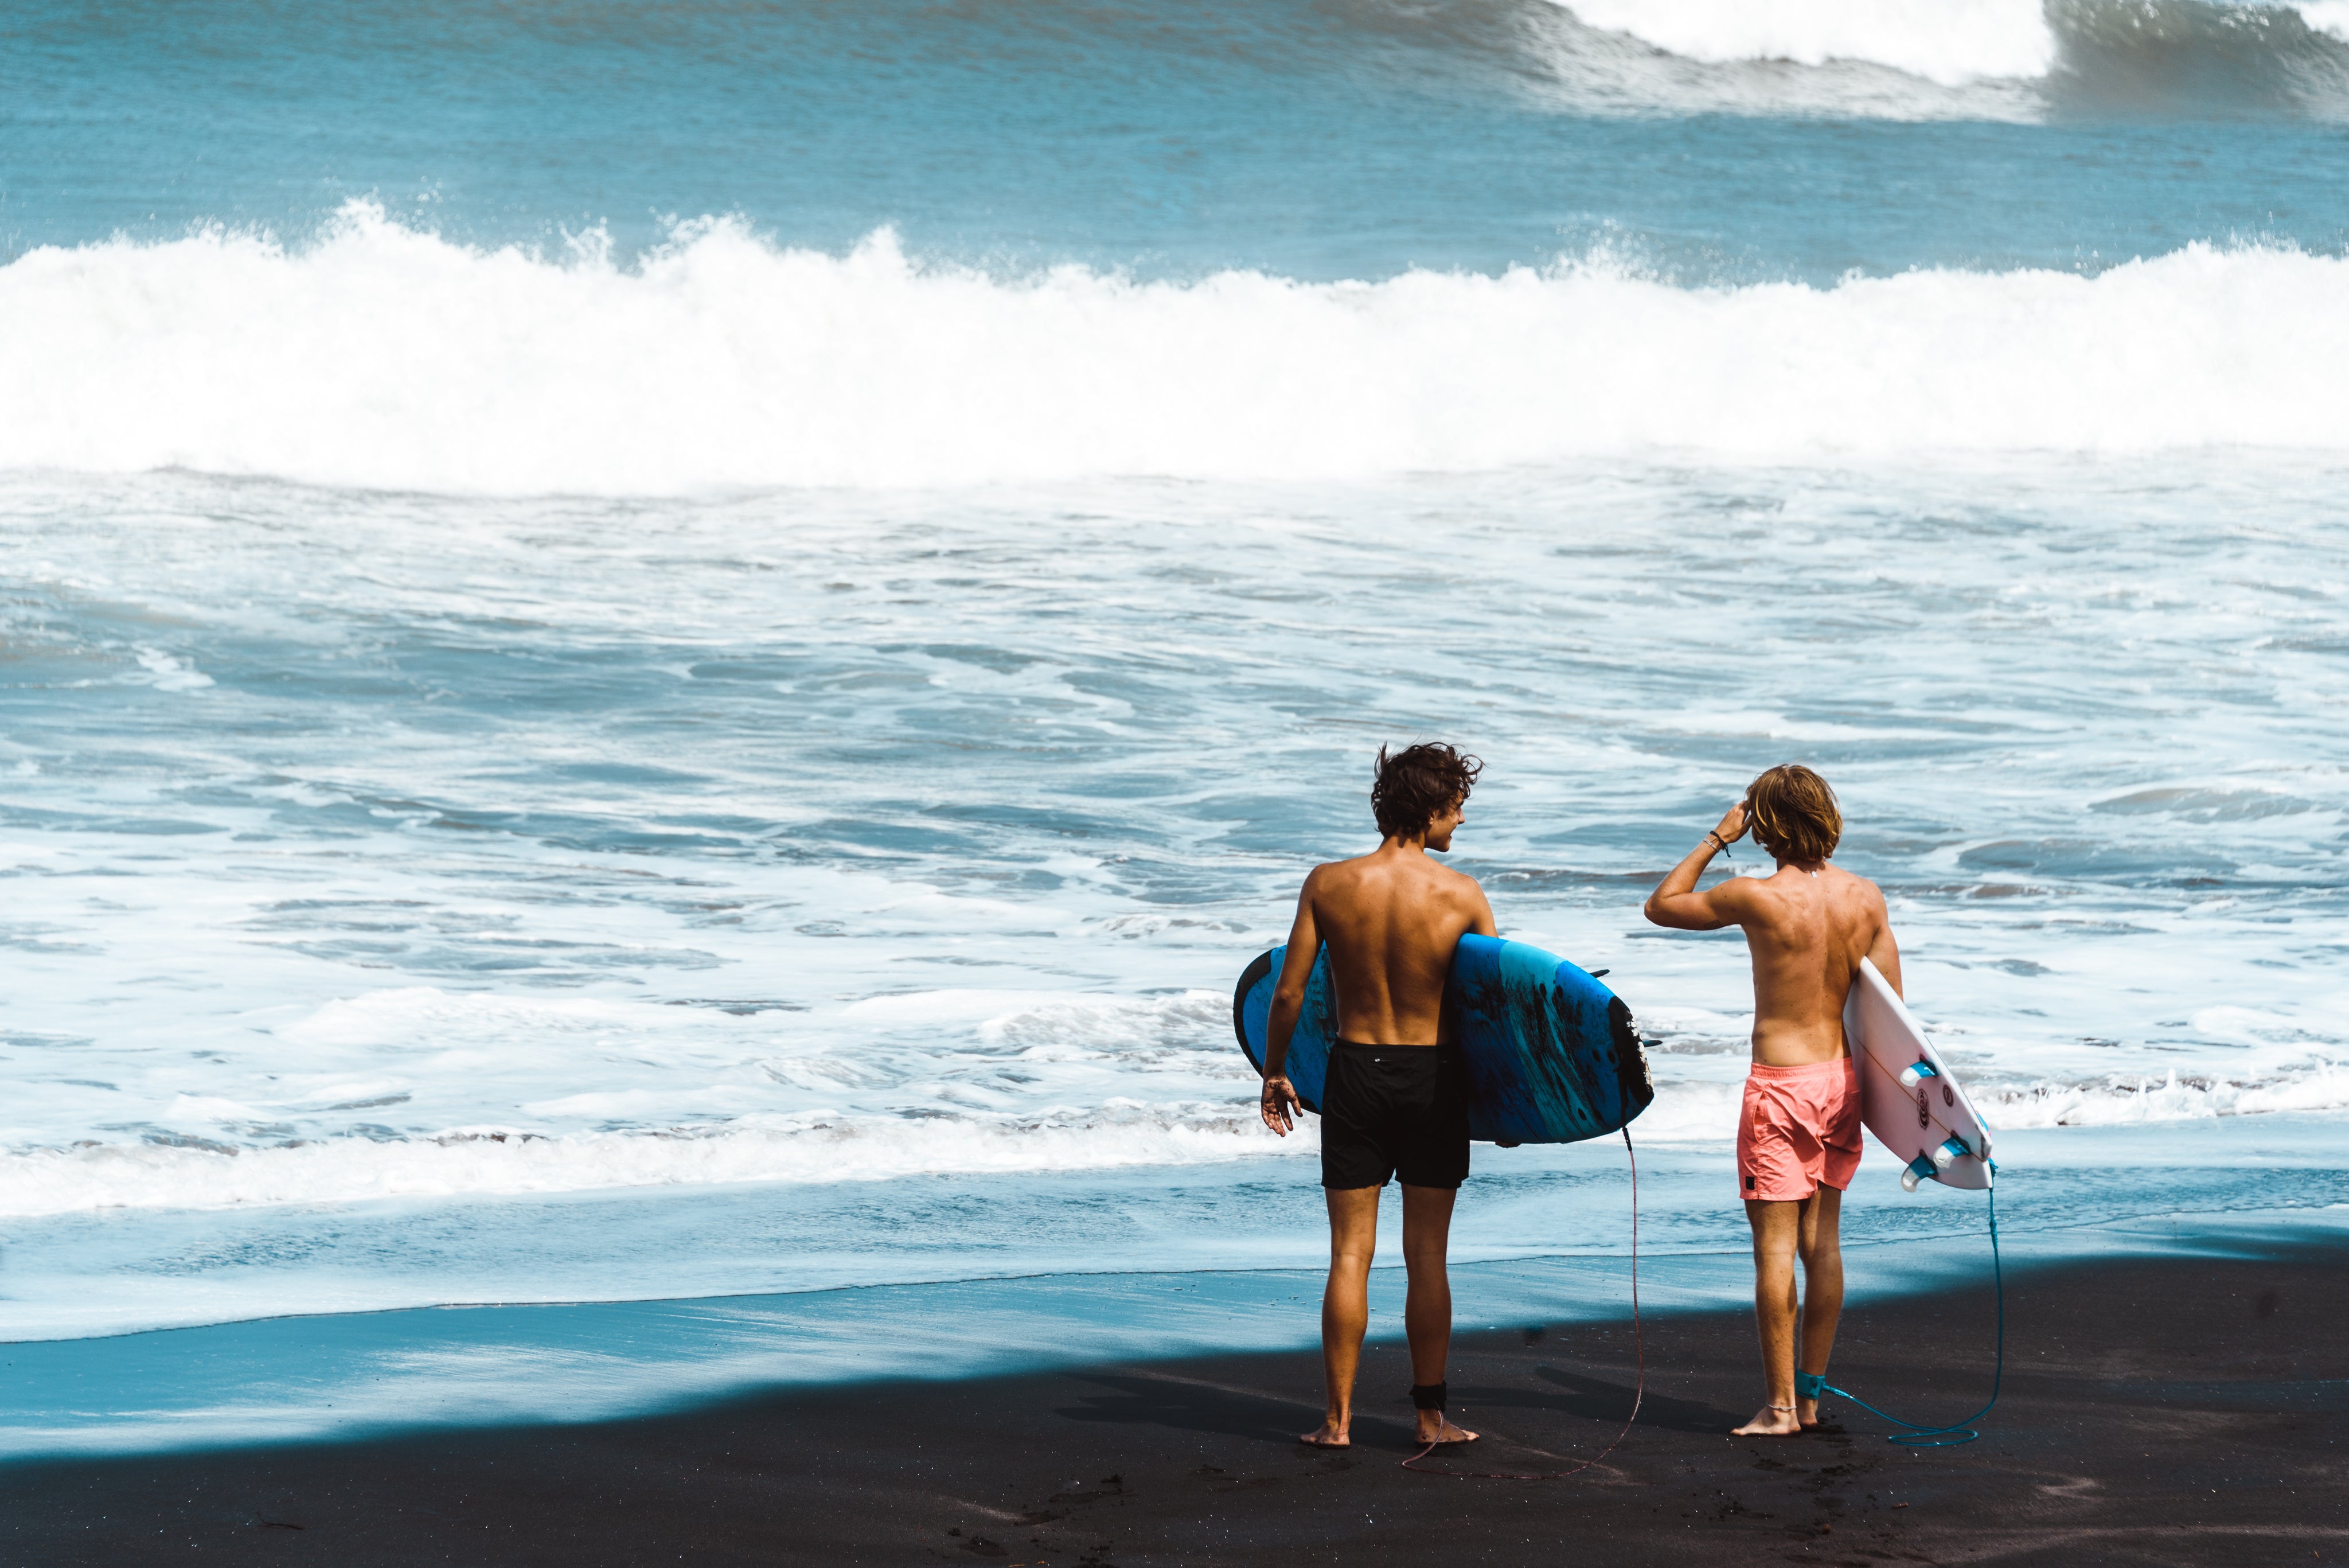 Surfers standing on the beach